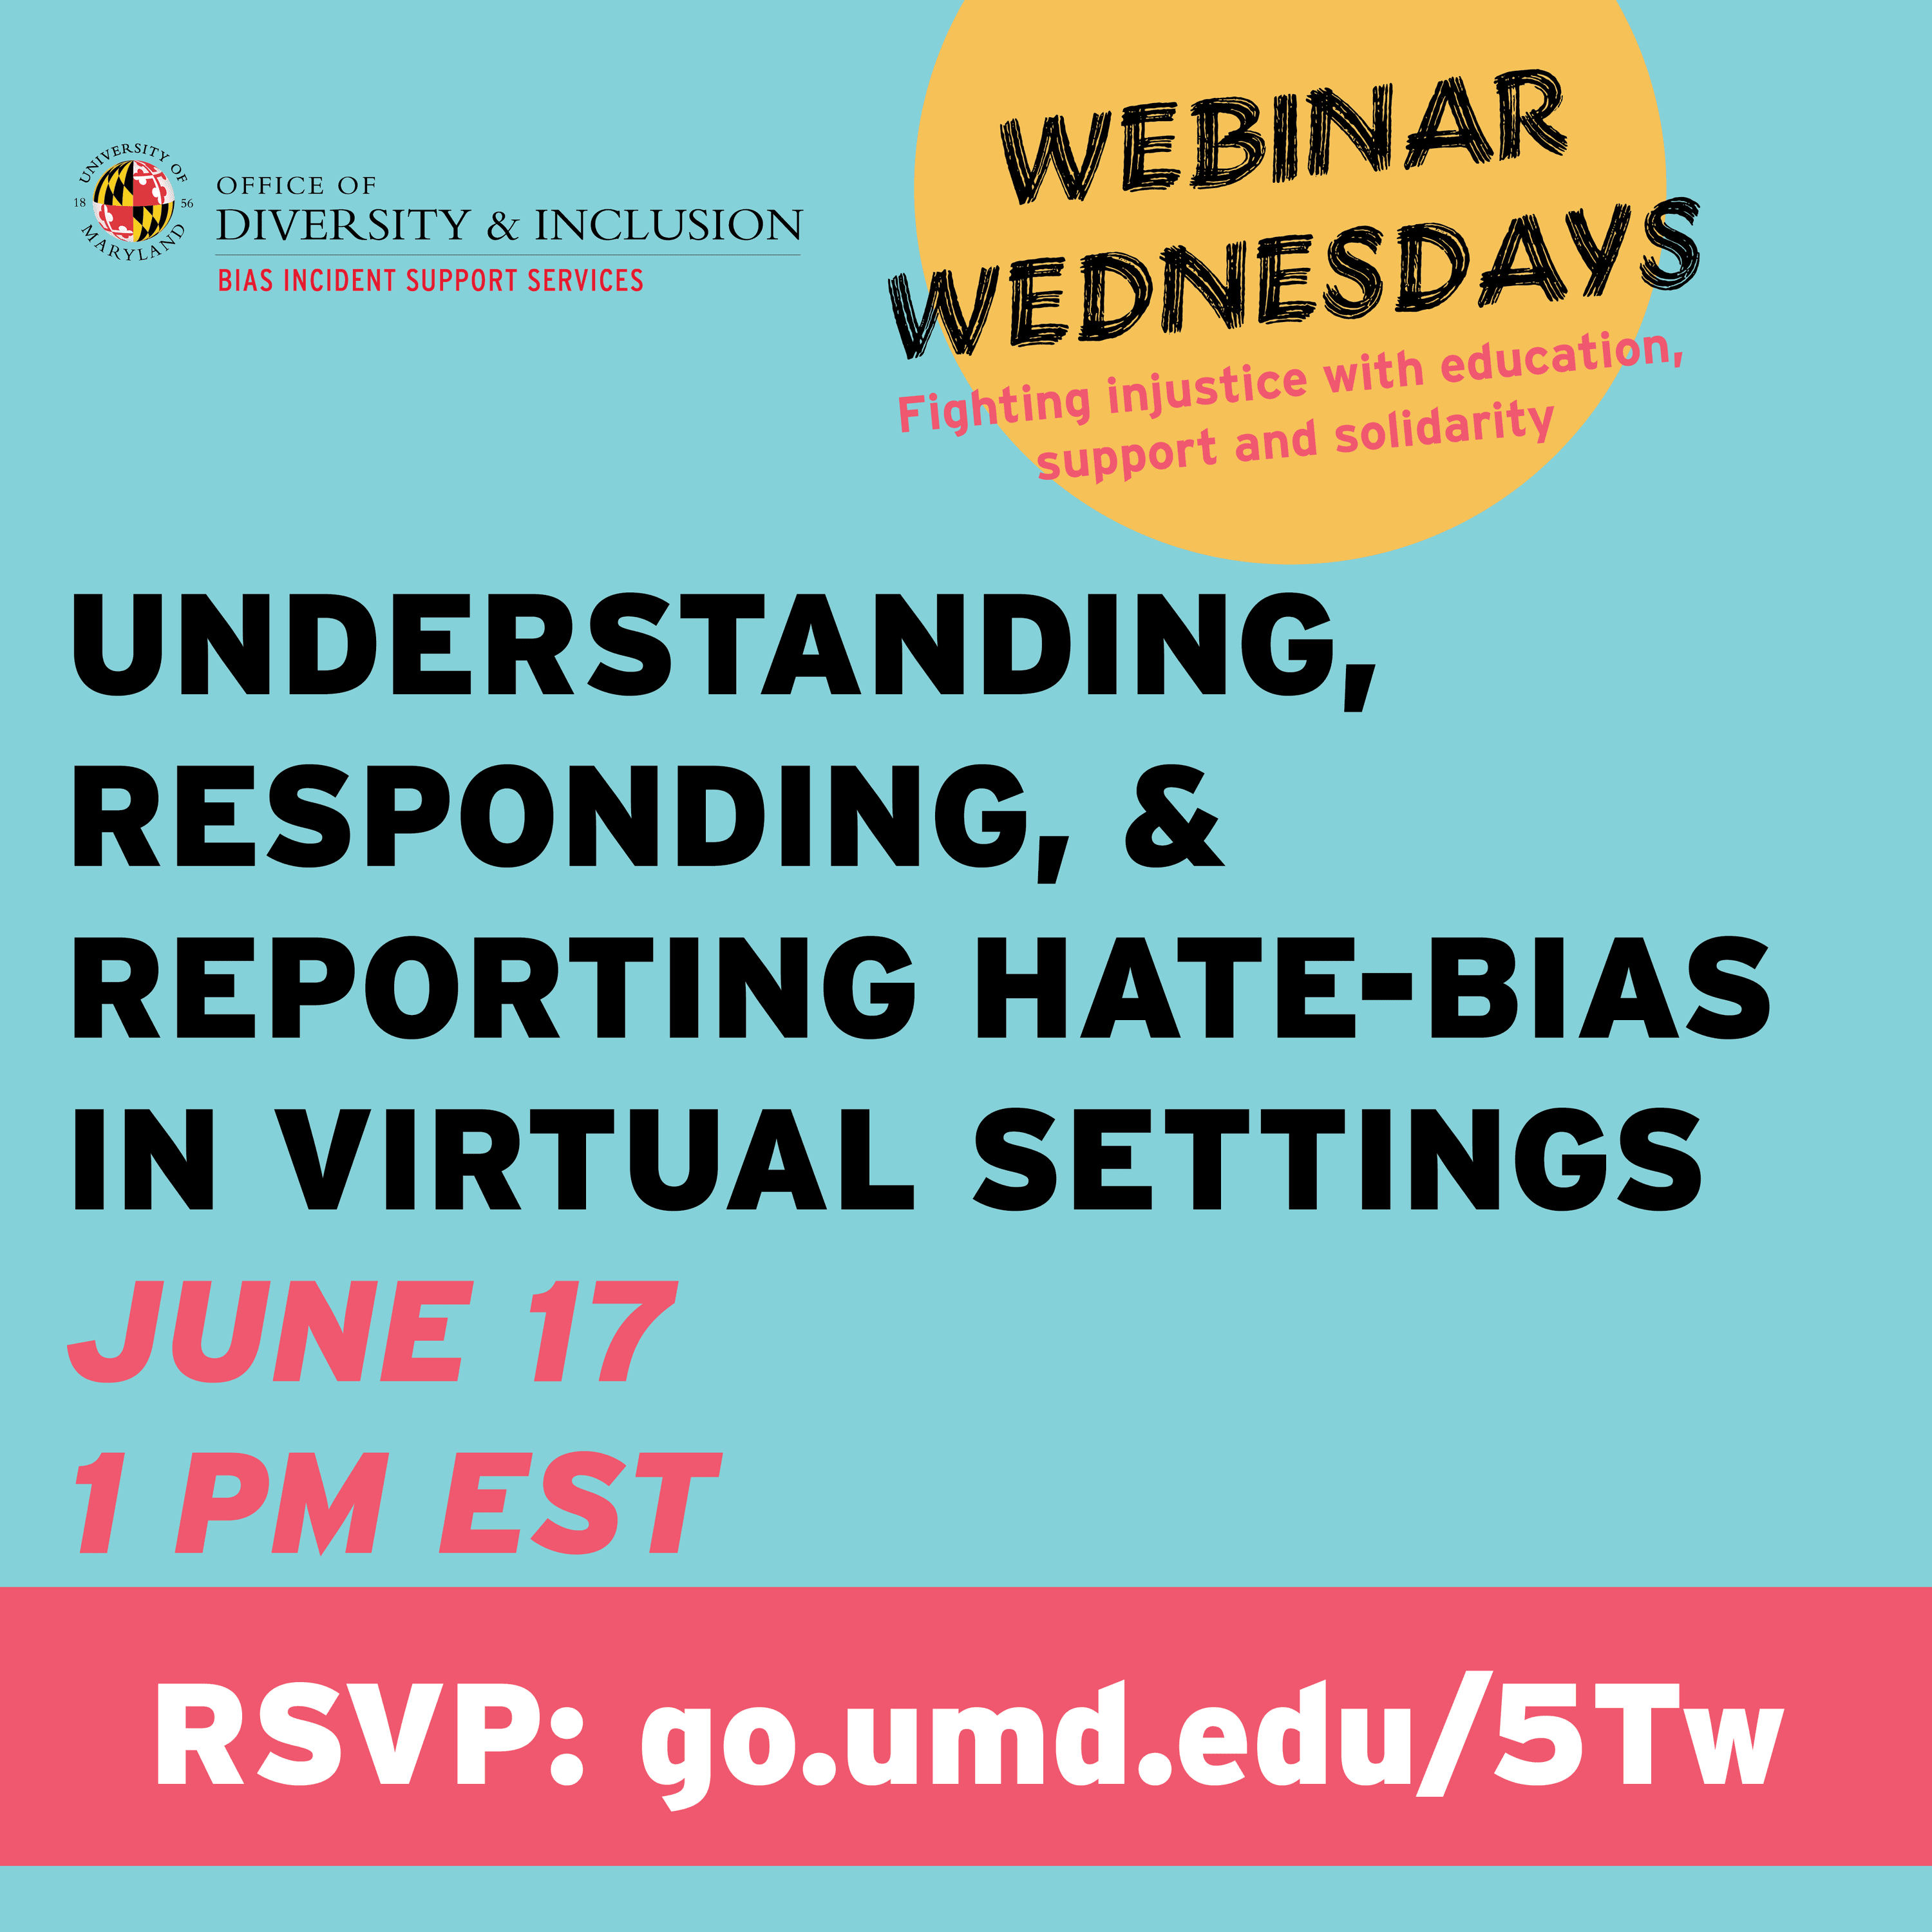 A turquoise background with a yellow sun with the text Webinar Wednesdays, Understanding, Responding and Reporting Hate-Bias in Virtual Settings